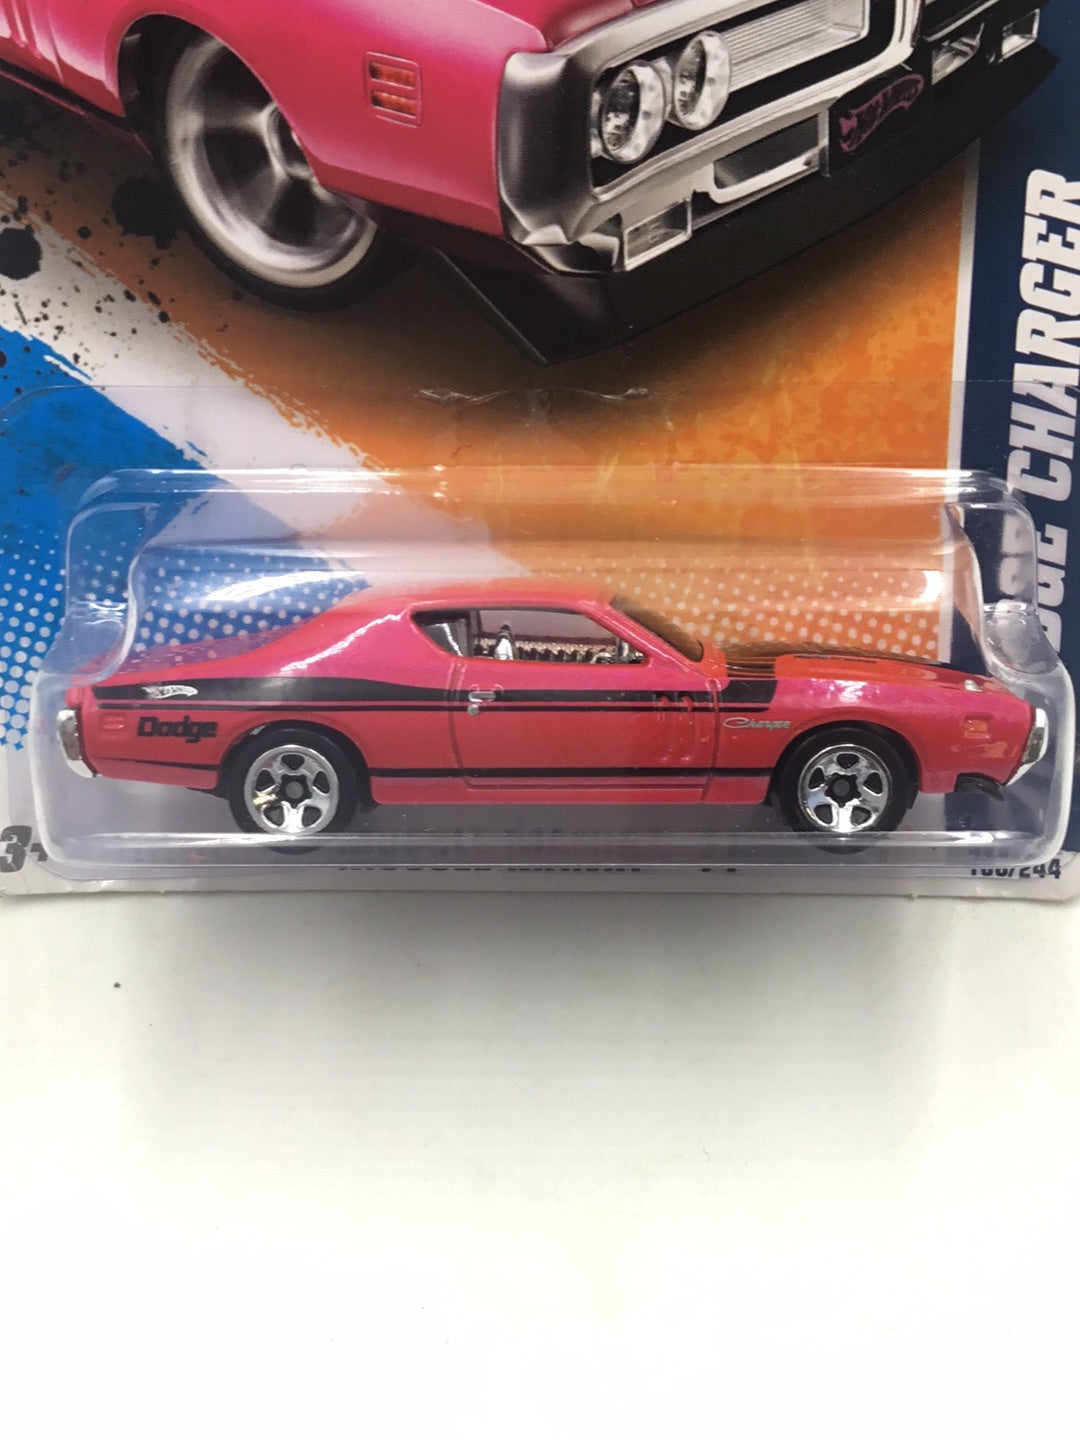 2011 Hot Wheels #108 71 Dodge Charger Pink R5